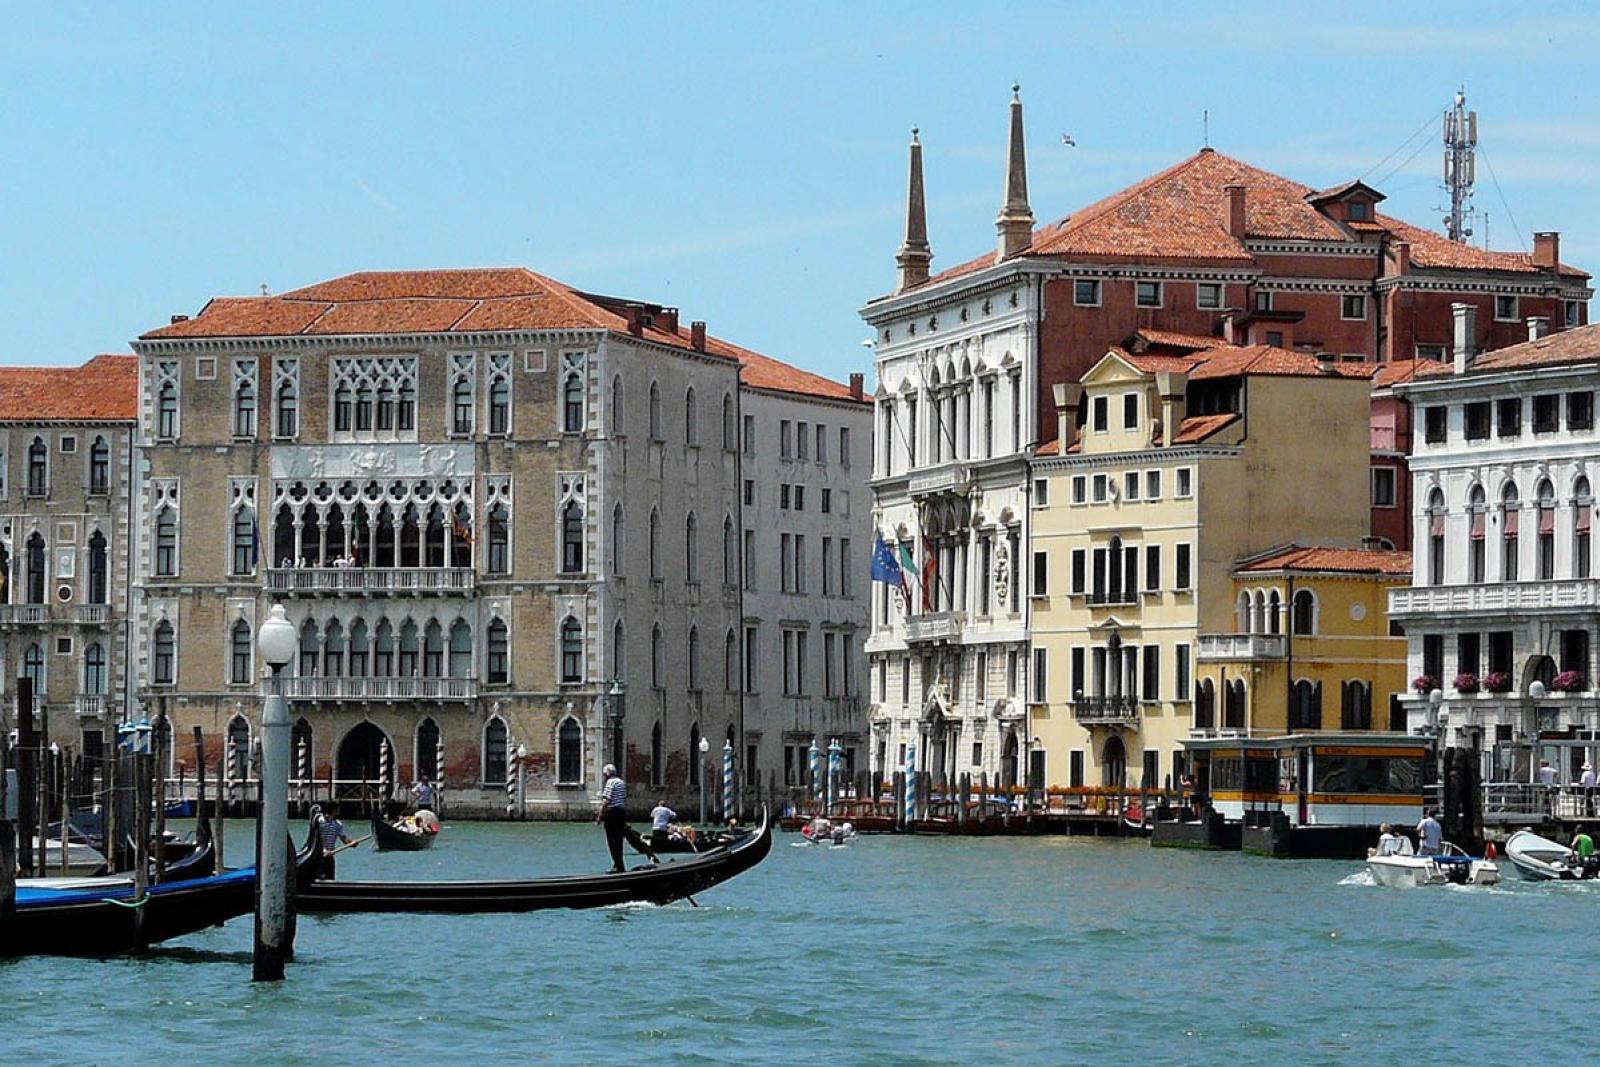 Ca’ Foscari University of Venice. Call for Papers: The 6th PUBSIC Conference